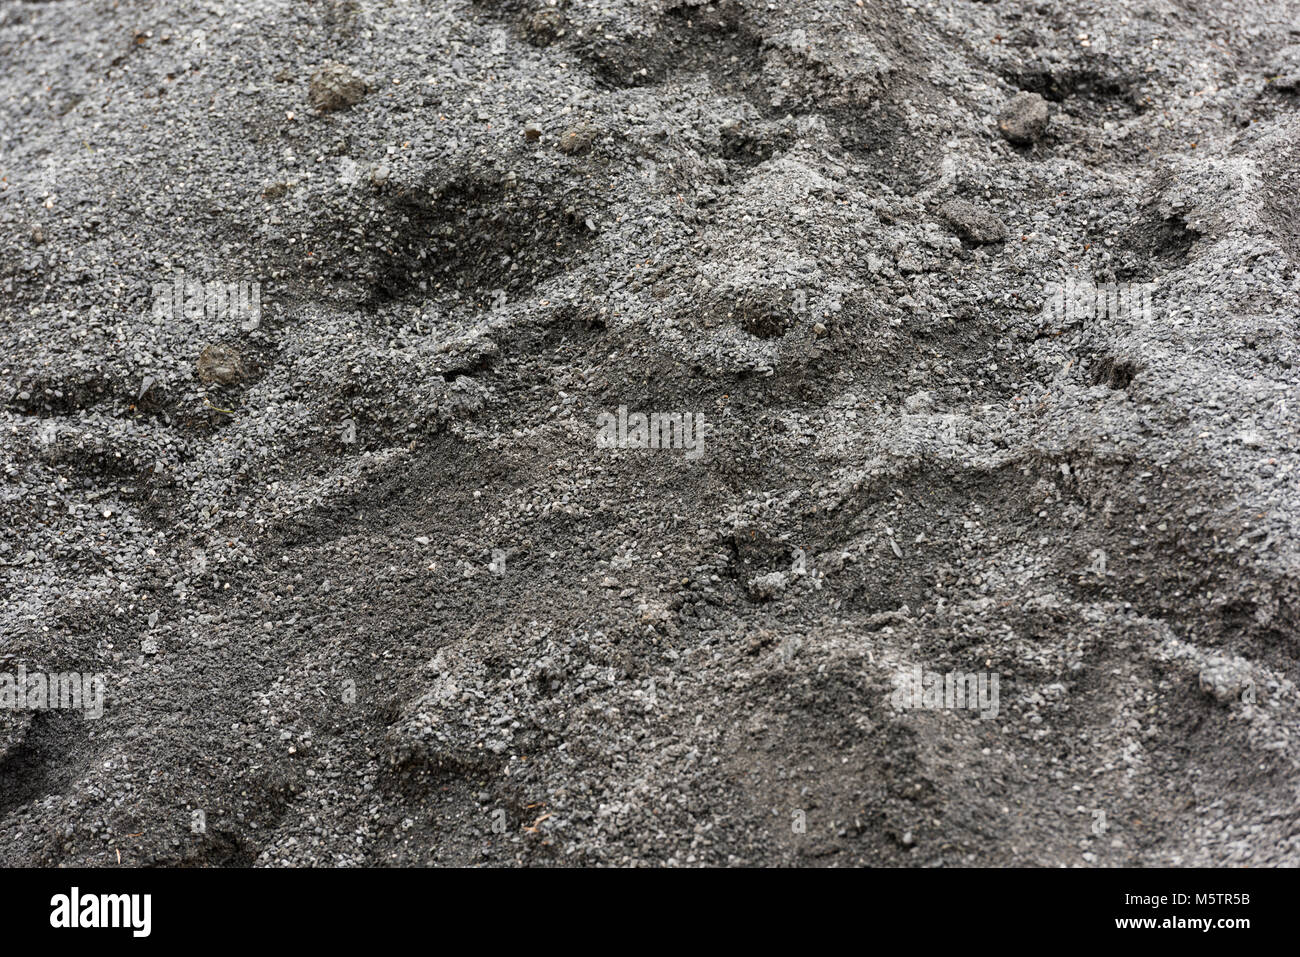 Construction Materials; Sand and gravel material Stock Photo